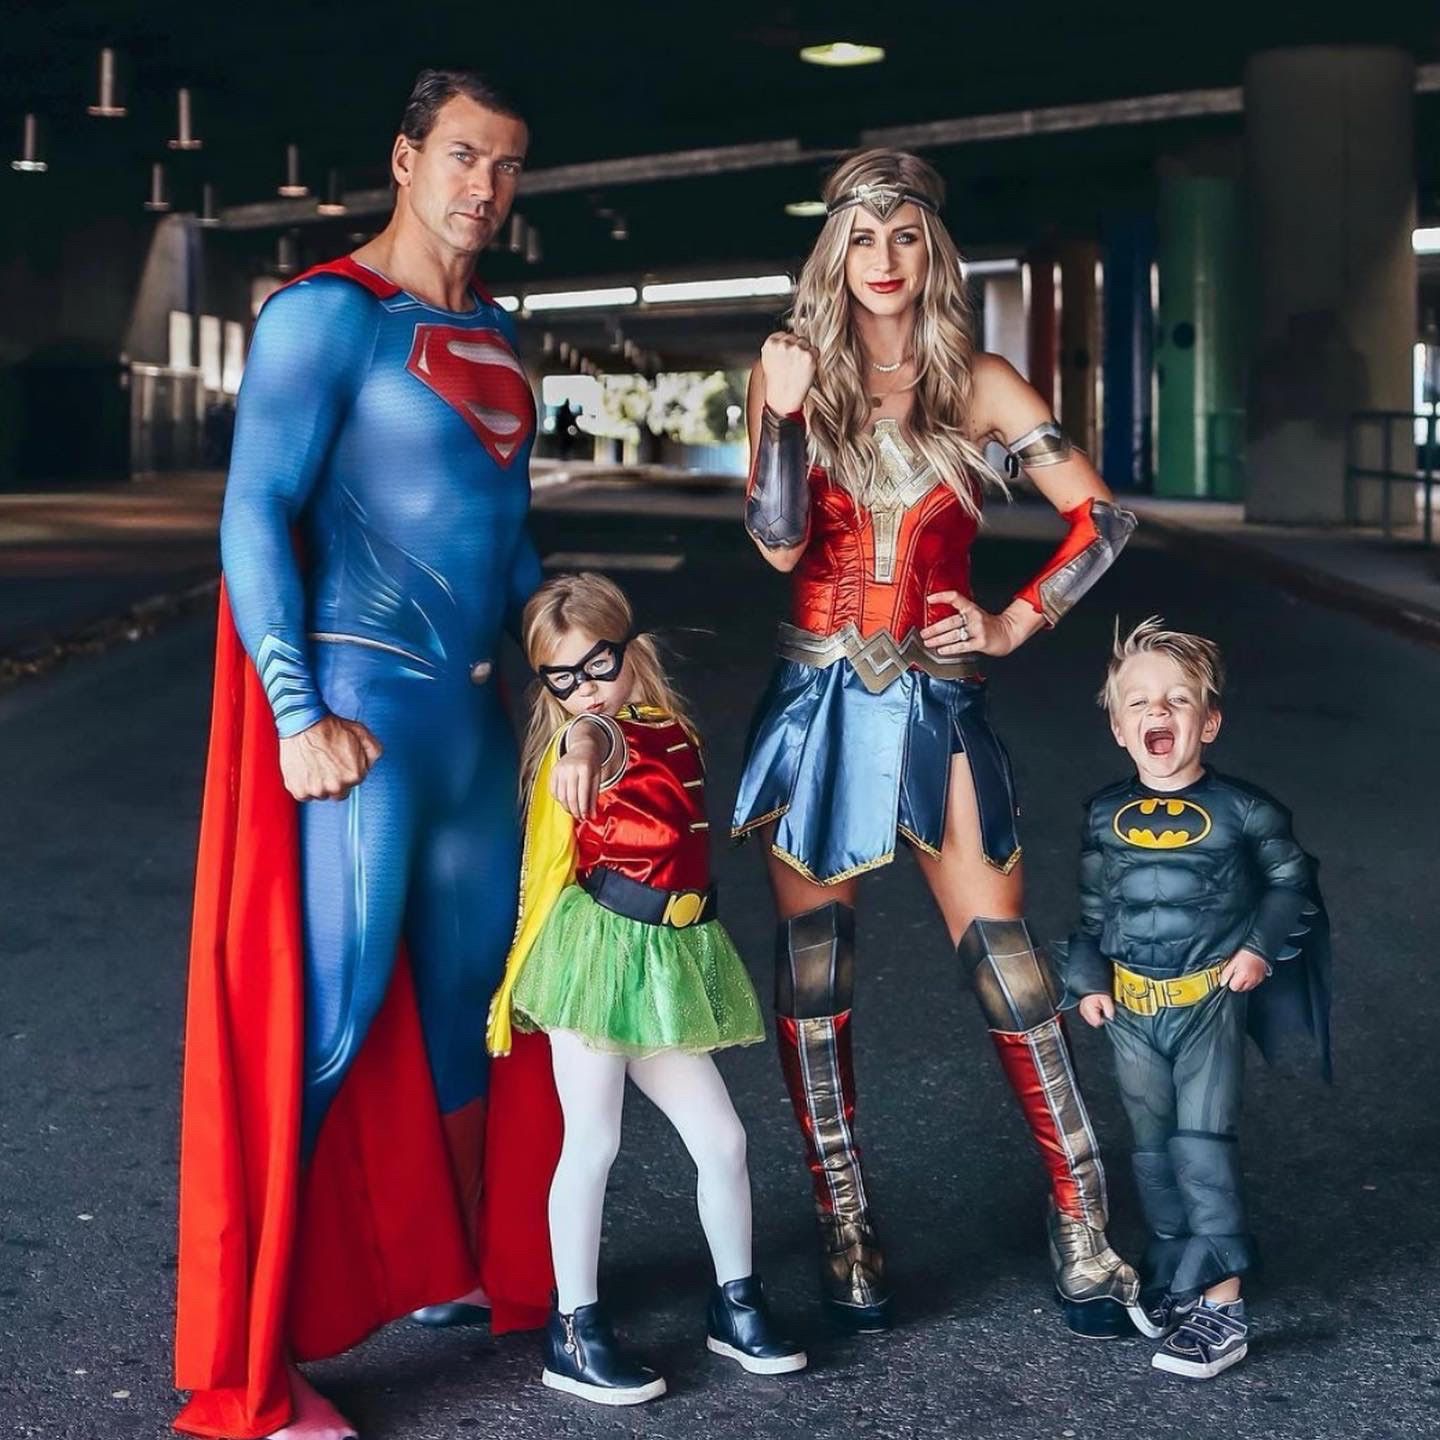 Spooktacular Family Fun: Halloween Costume Ideas for the Whole Crew